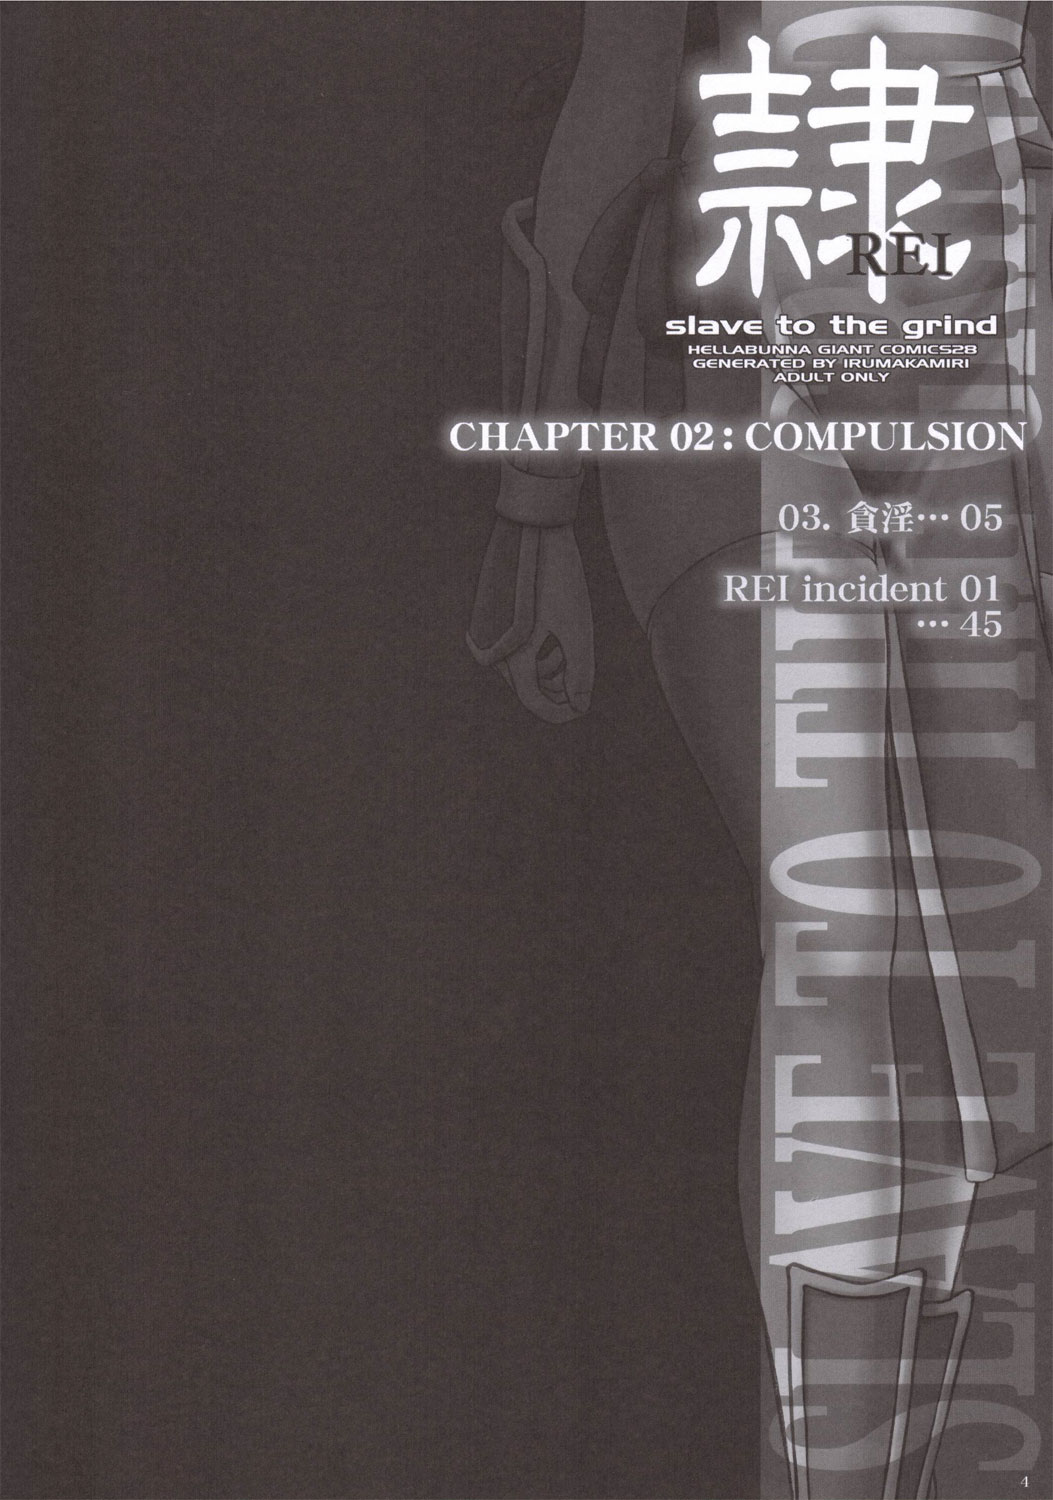 REI - slave to the grind - CHAPTER 02: COMPULSION numero d'image 2